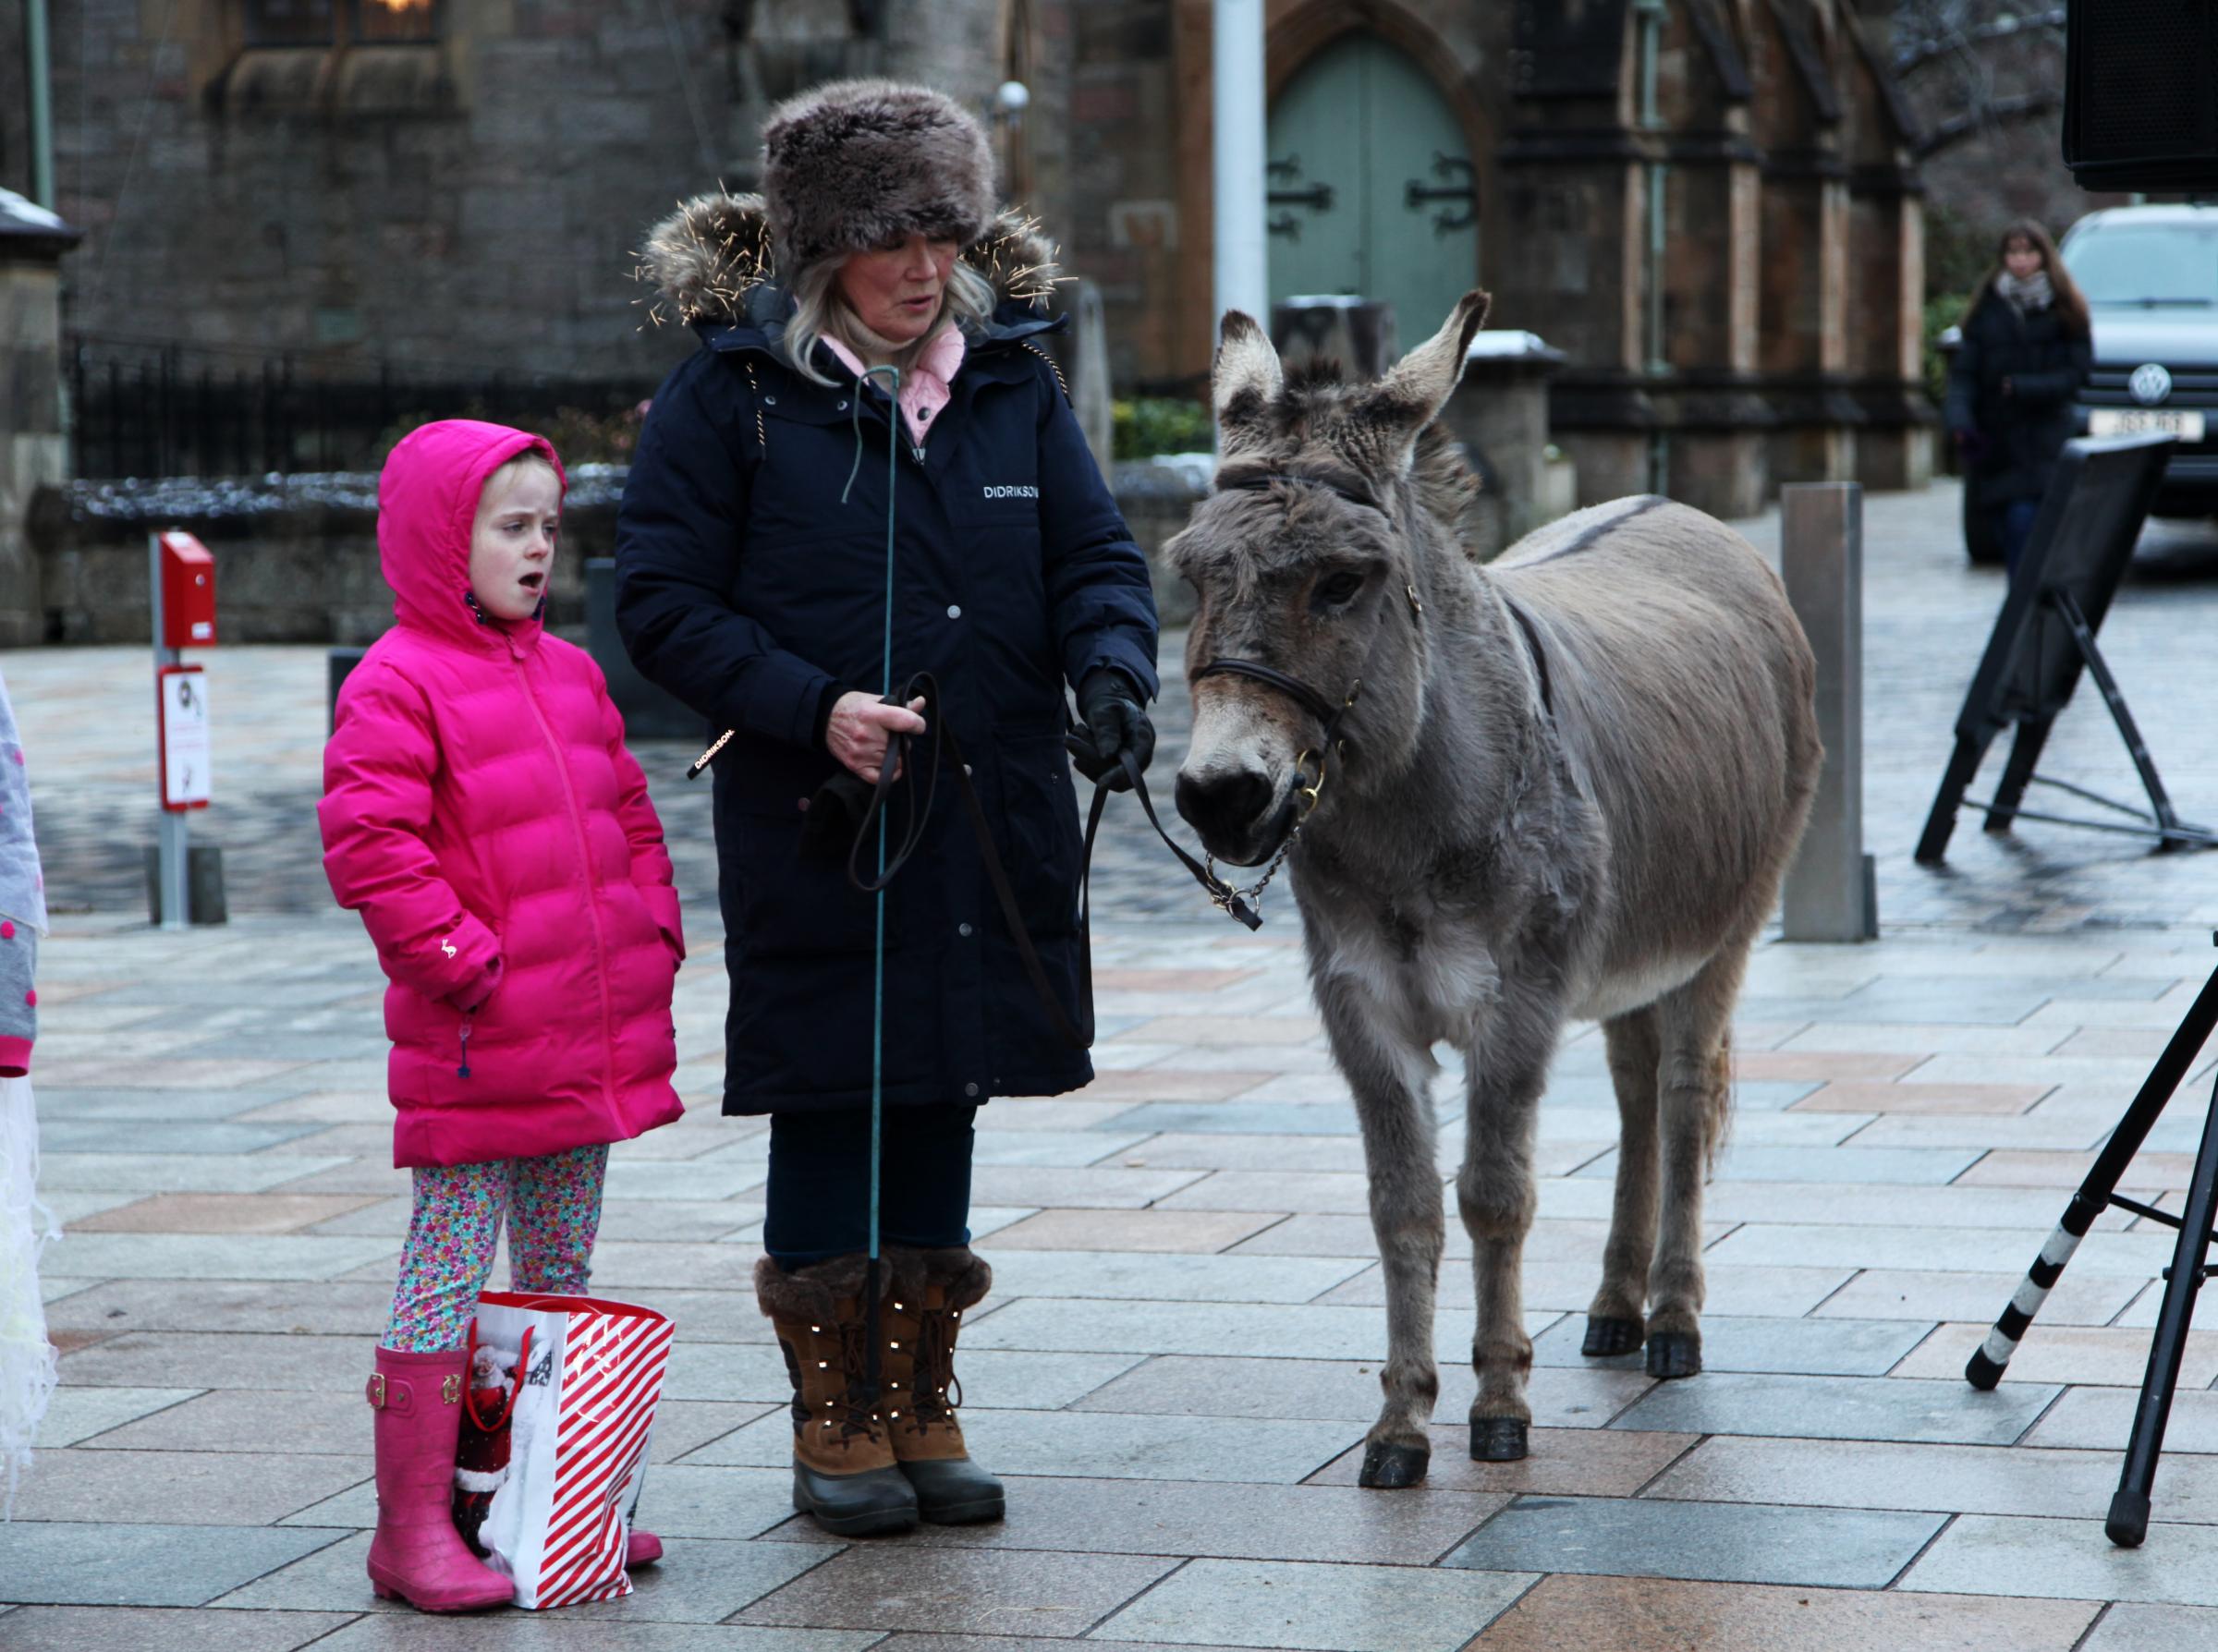 Elise the donkey at the Nativity in the Square.